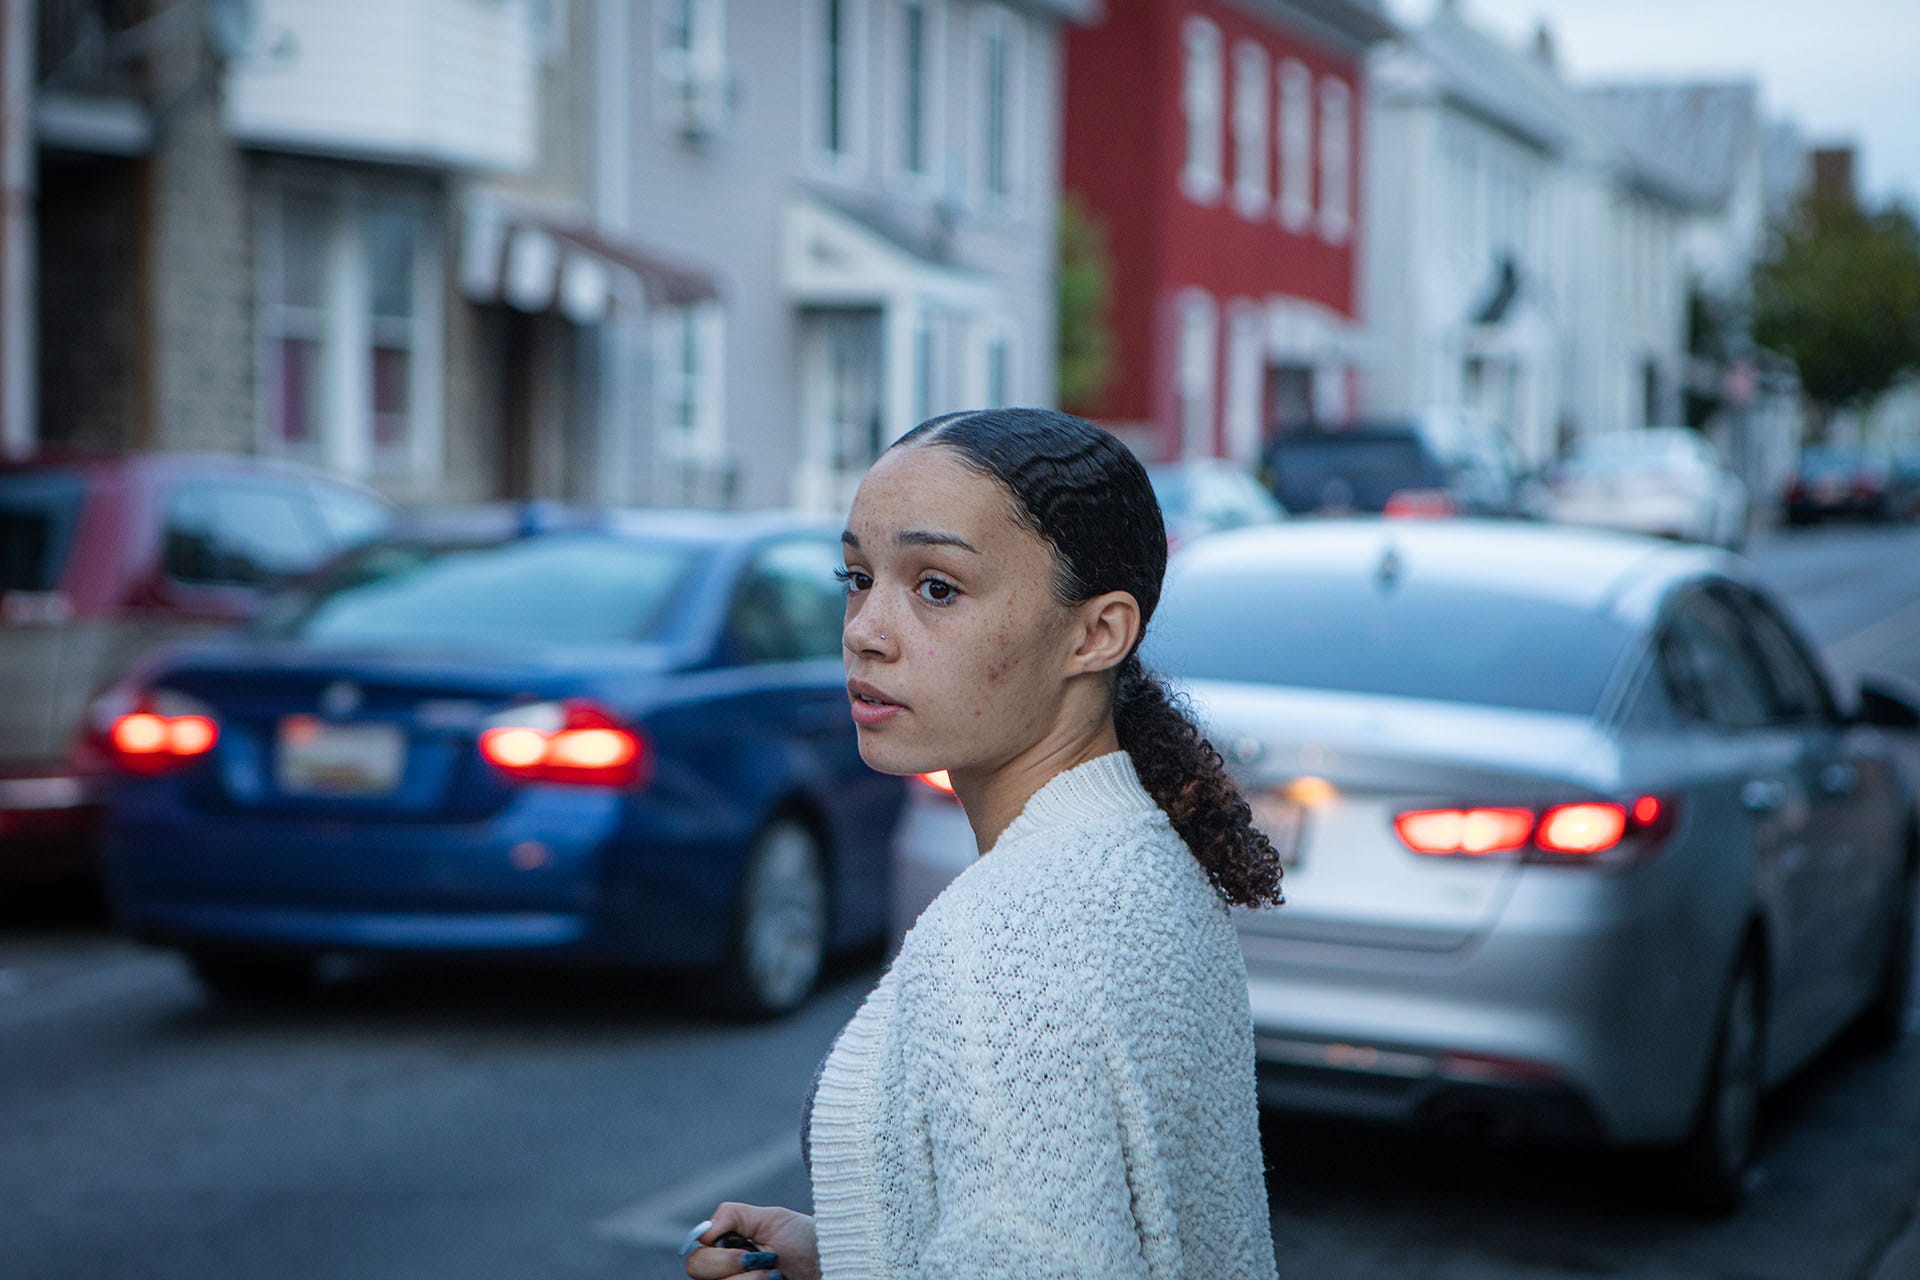 Brianna Stuart stood in front of the buildings where she encountered the police in 2016 as a 15-year-old, in Hagerstown, Md., on Oct. 8, 2021.